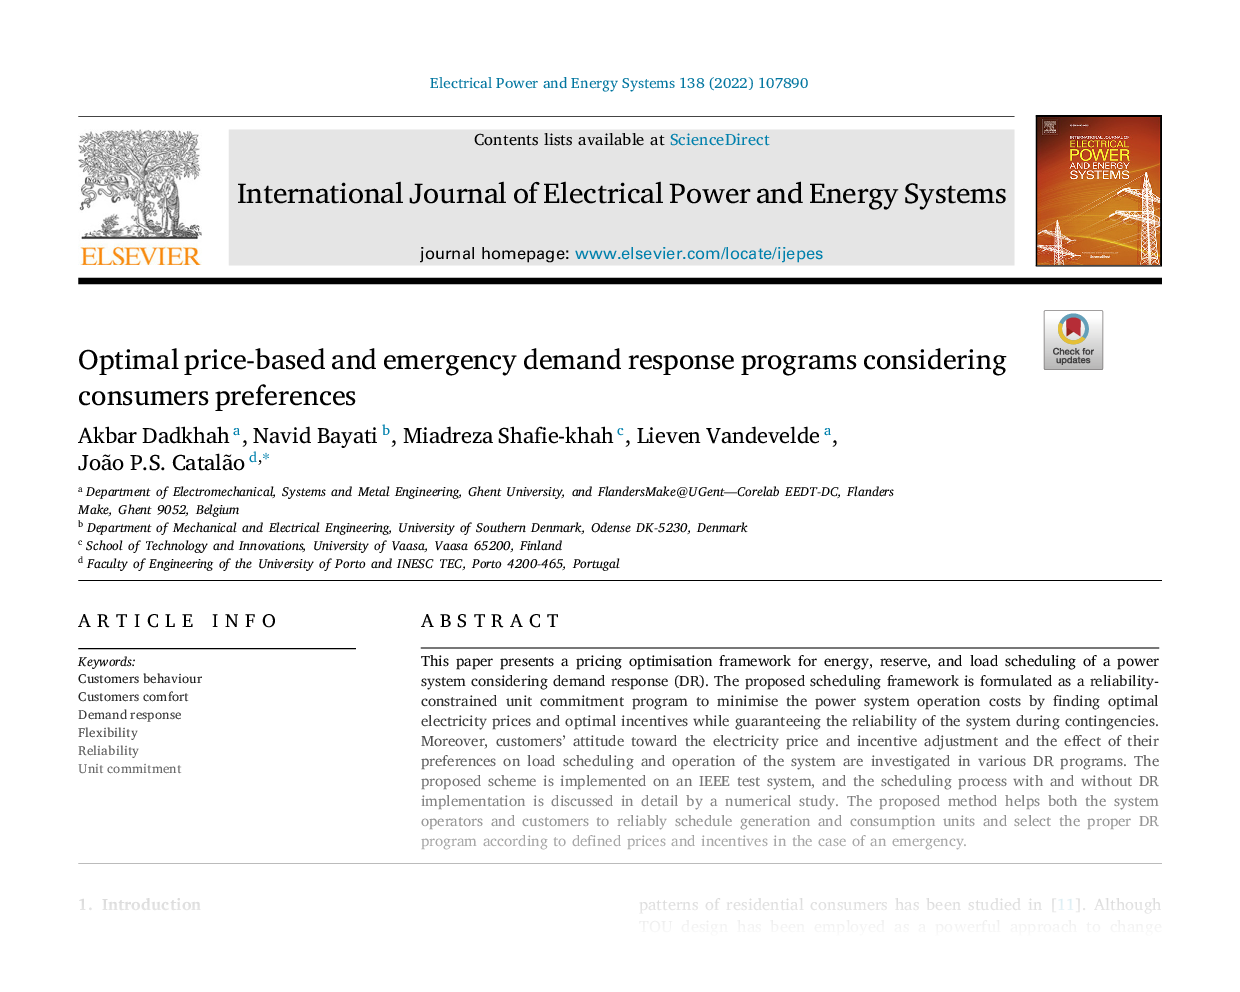 Optimal price-based and emergency demand response programs considering consumers preferences